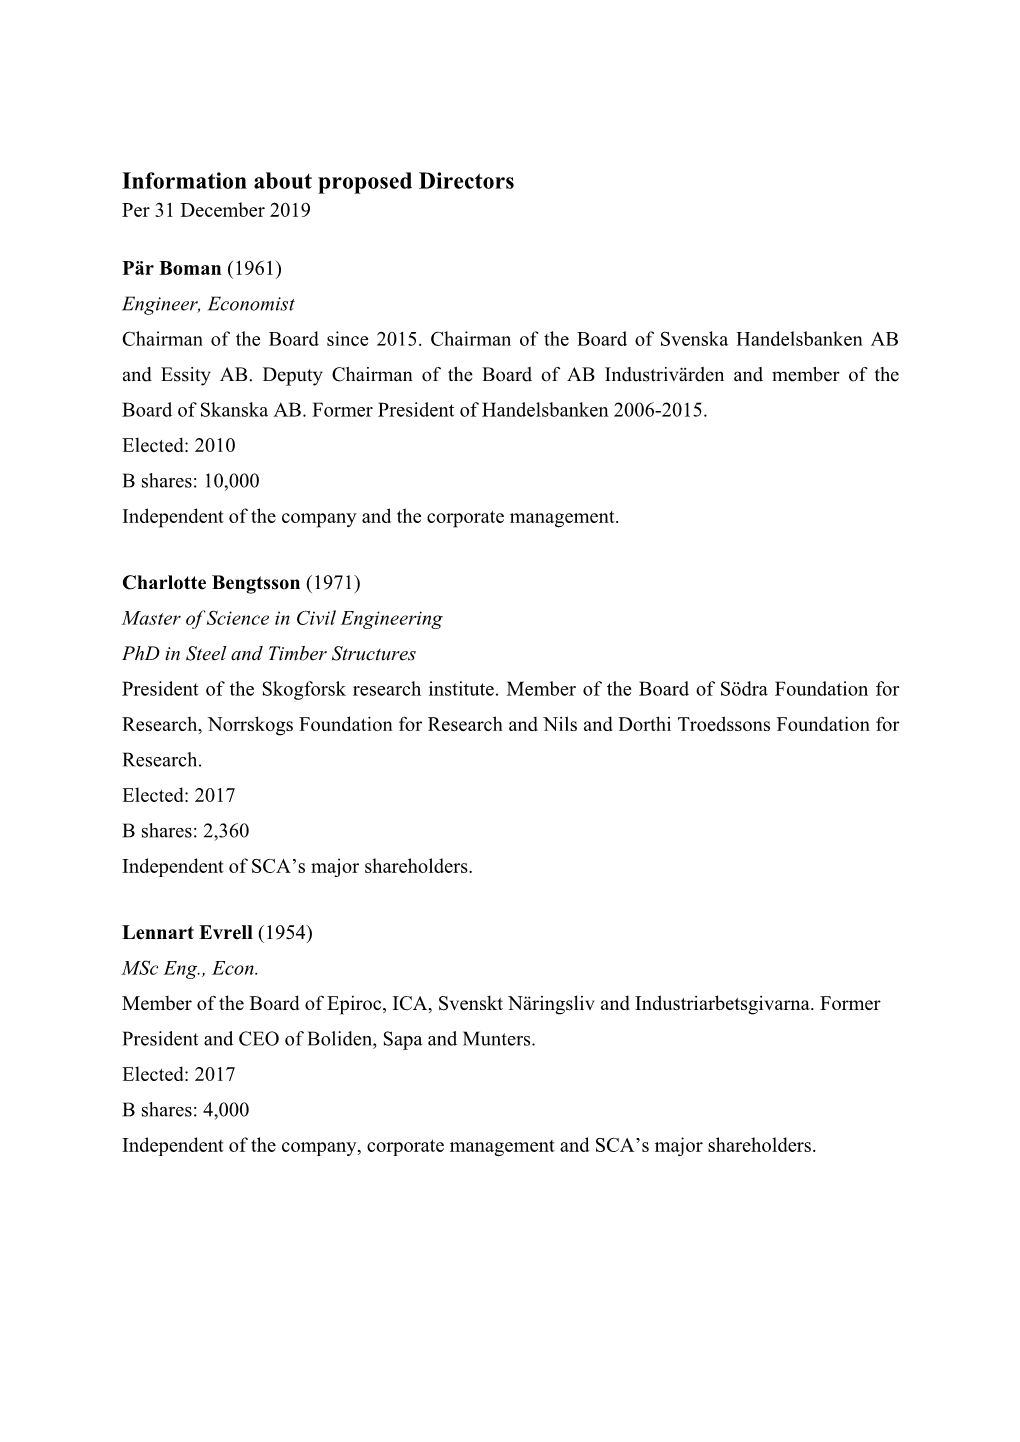 Information About Proposed Directors (Pdf)